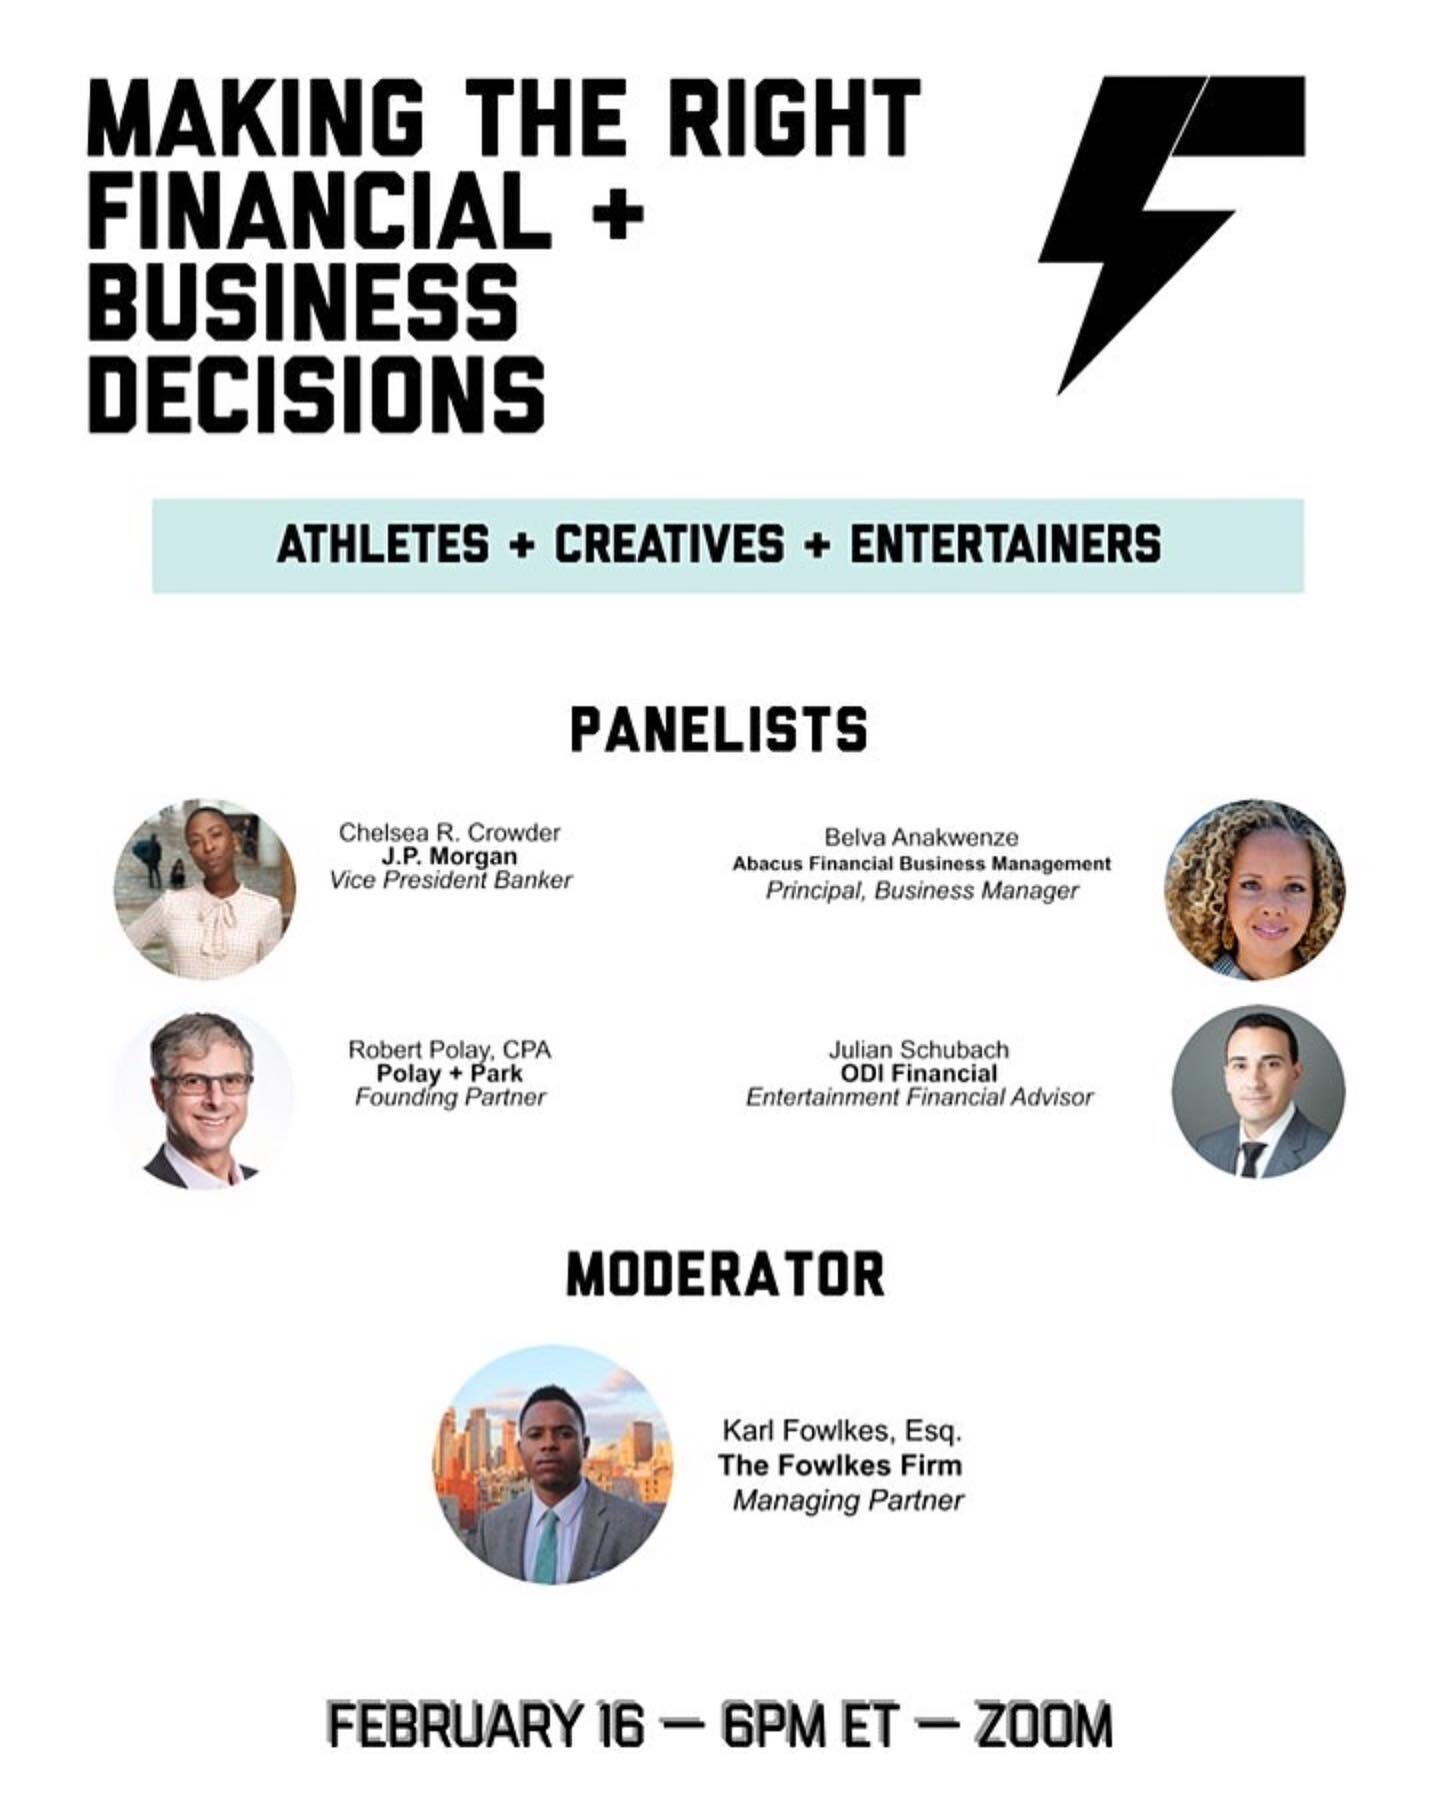 Register for our panel discussion about financial education and investing for artists and entertainers. Going to be 🔥  bit.ly/3tFqObT